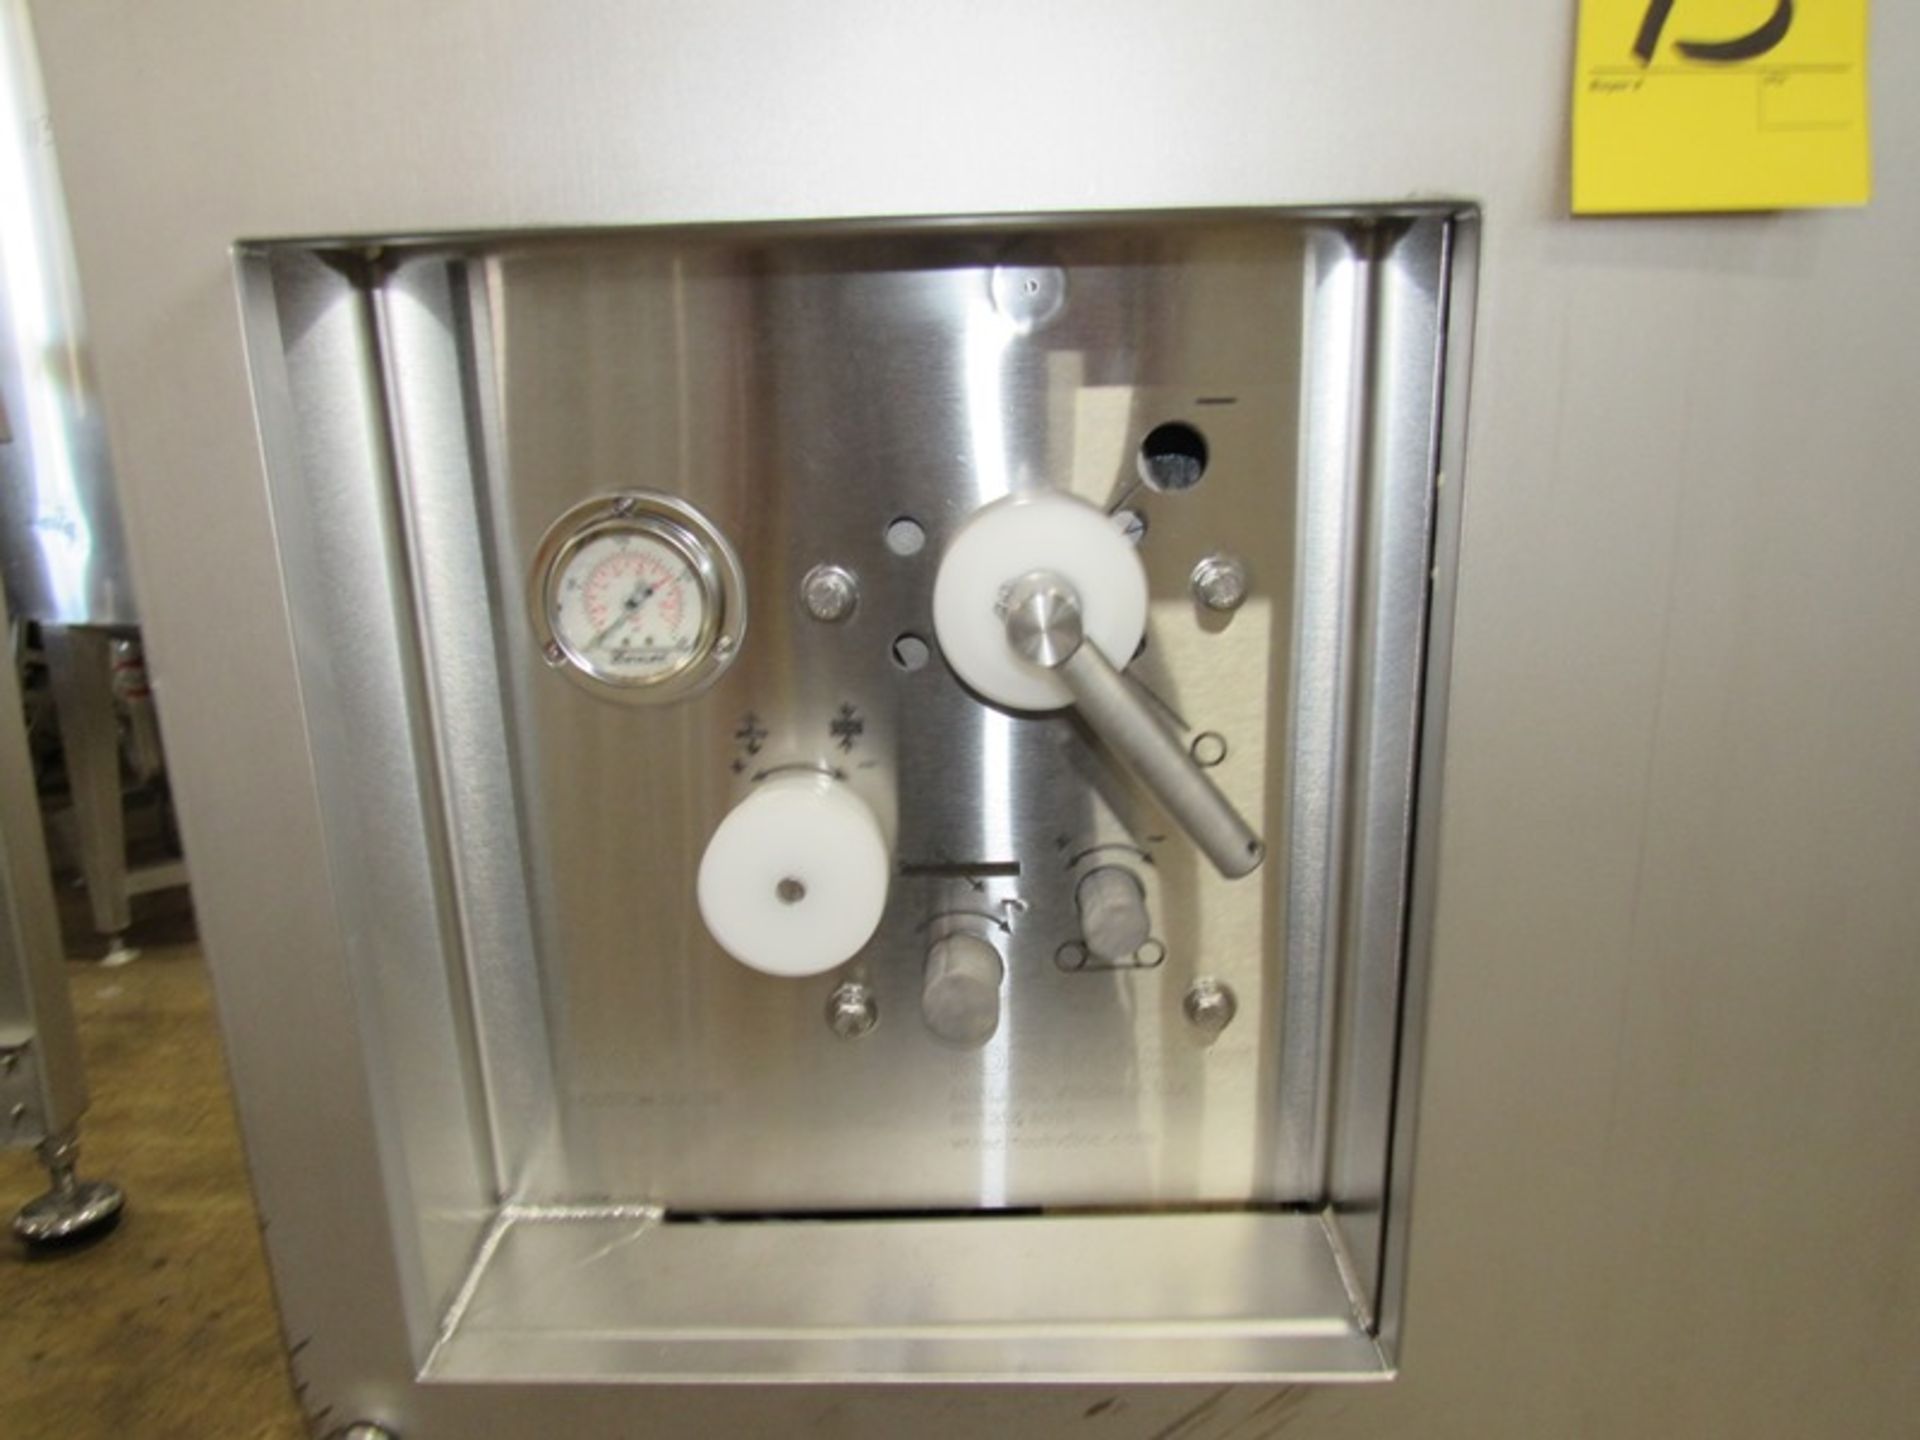 Ross Mdl. 990A Portion Slicer, Mfg. 2020, approx. new cost $288,000, (16) 3" dia. product feed tubes - Image 18 of 20